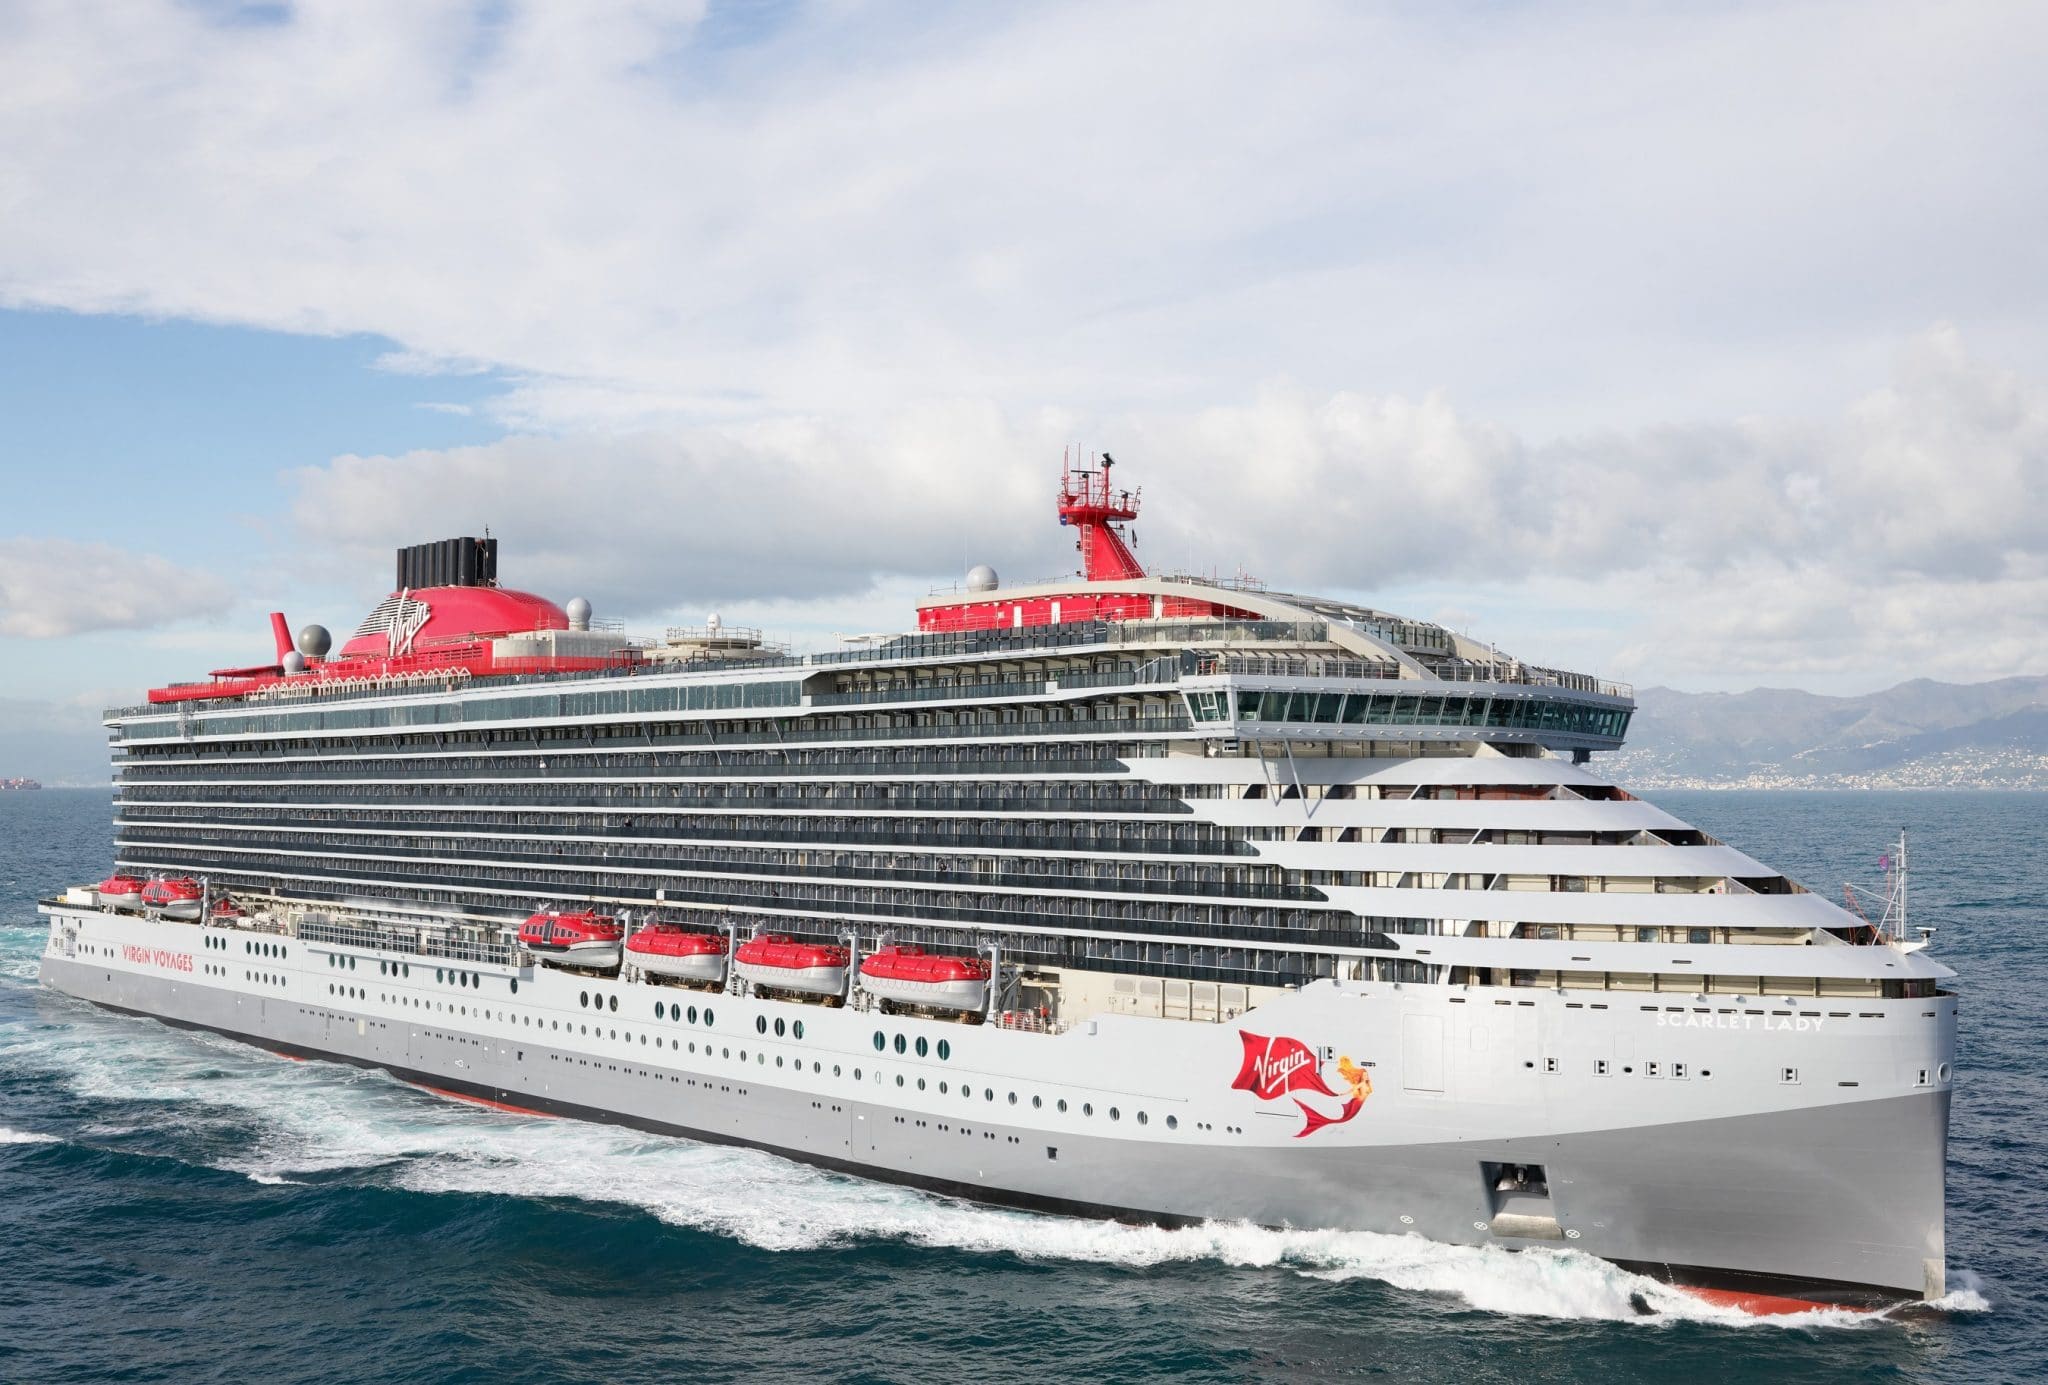 Virgin Cancels More Cruises on Scarlet Lady and Valiant Lady